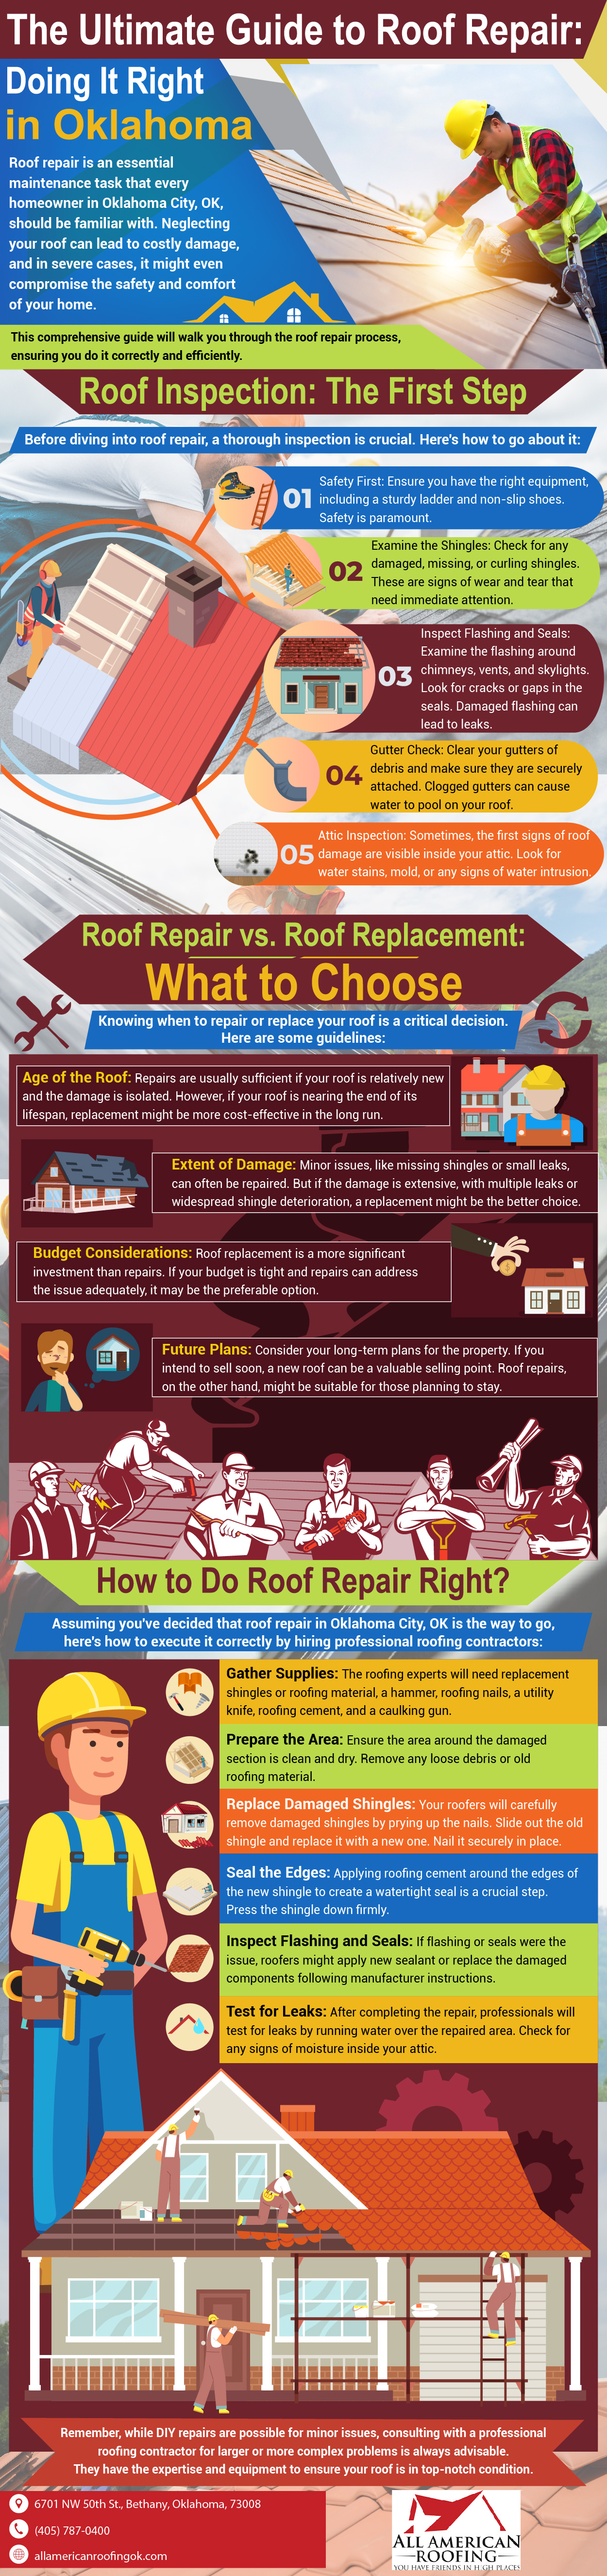 Infographic on roof repair in OKC from All american roofing company